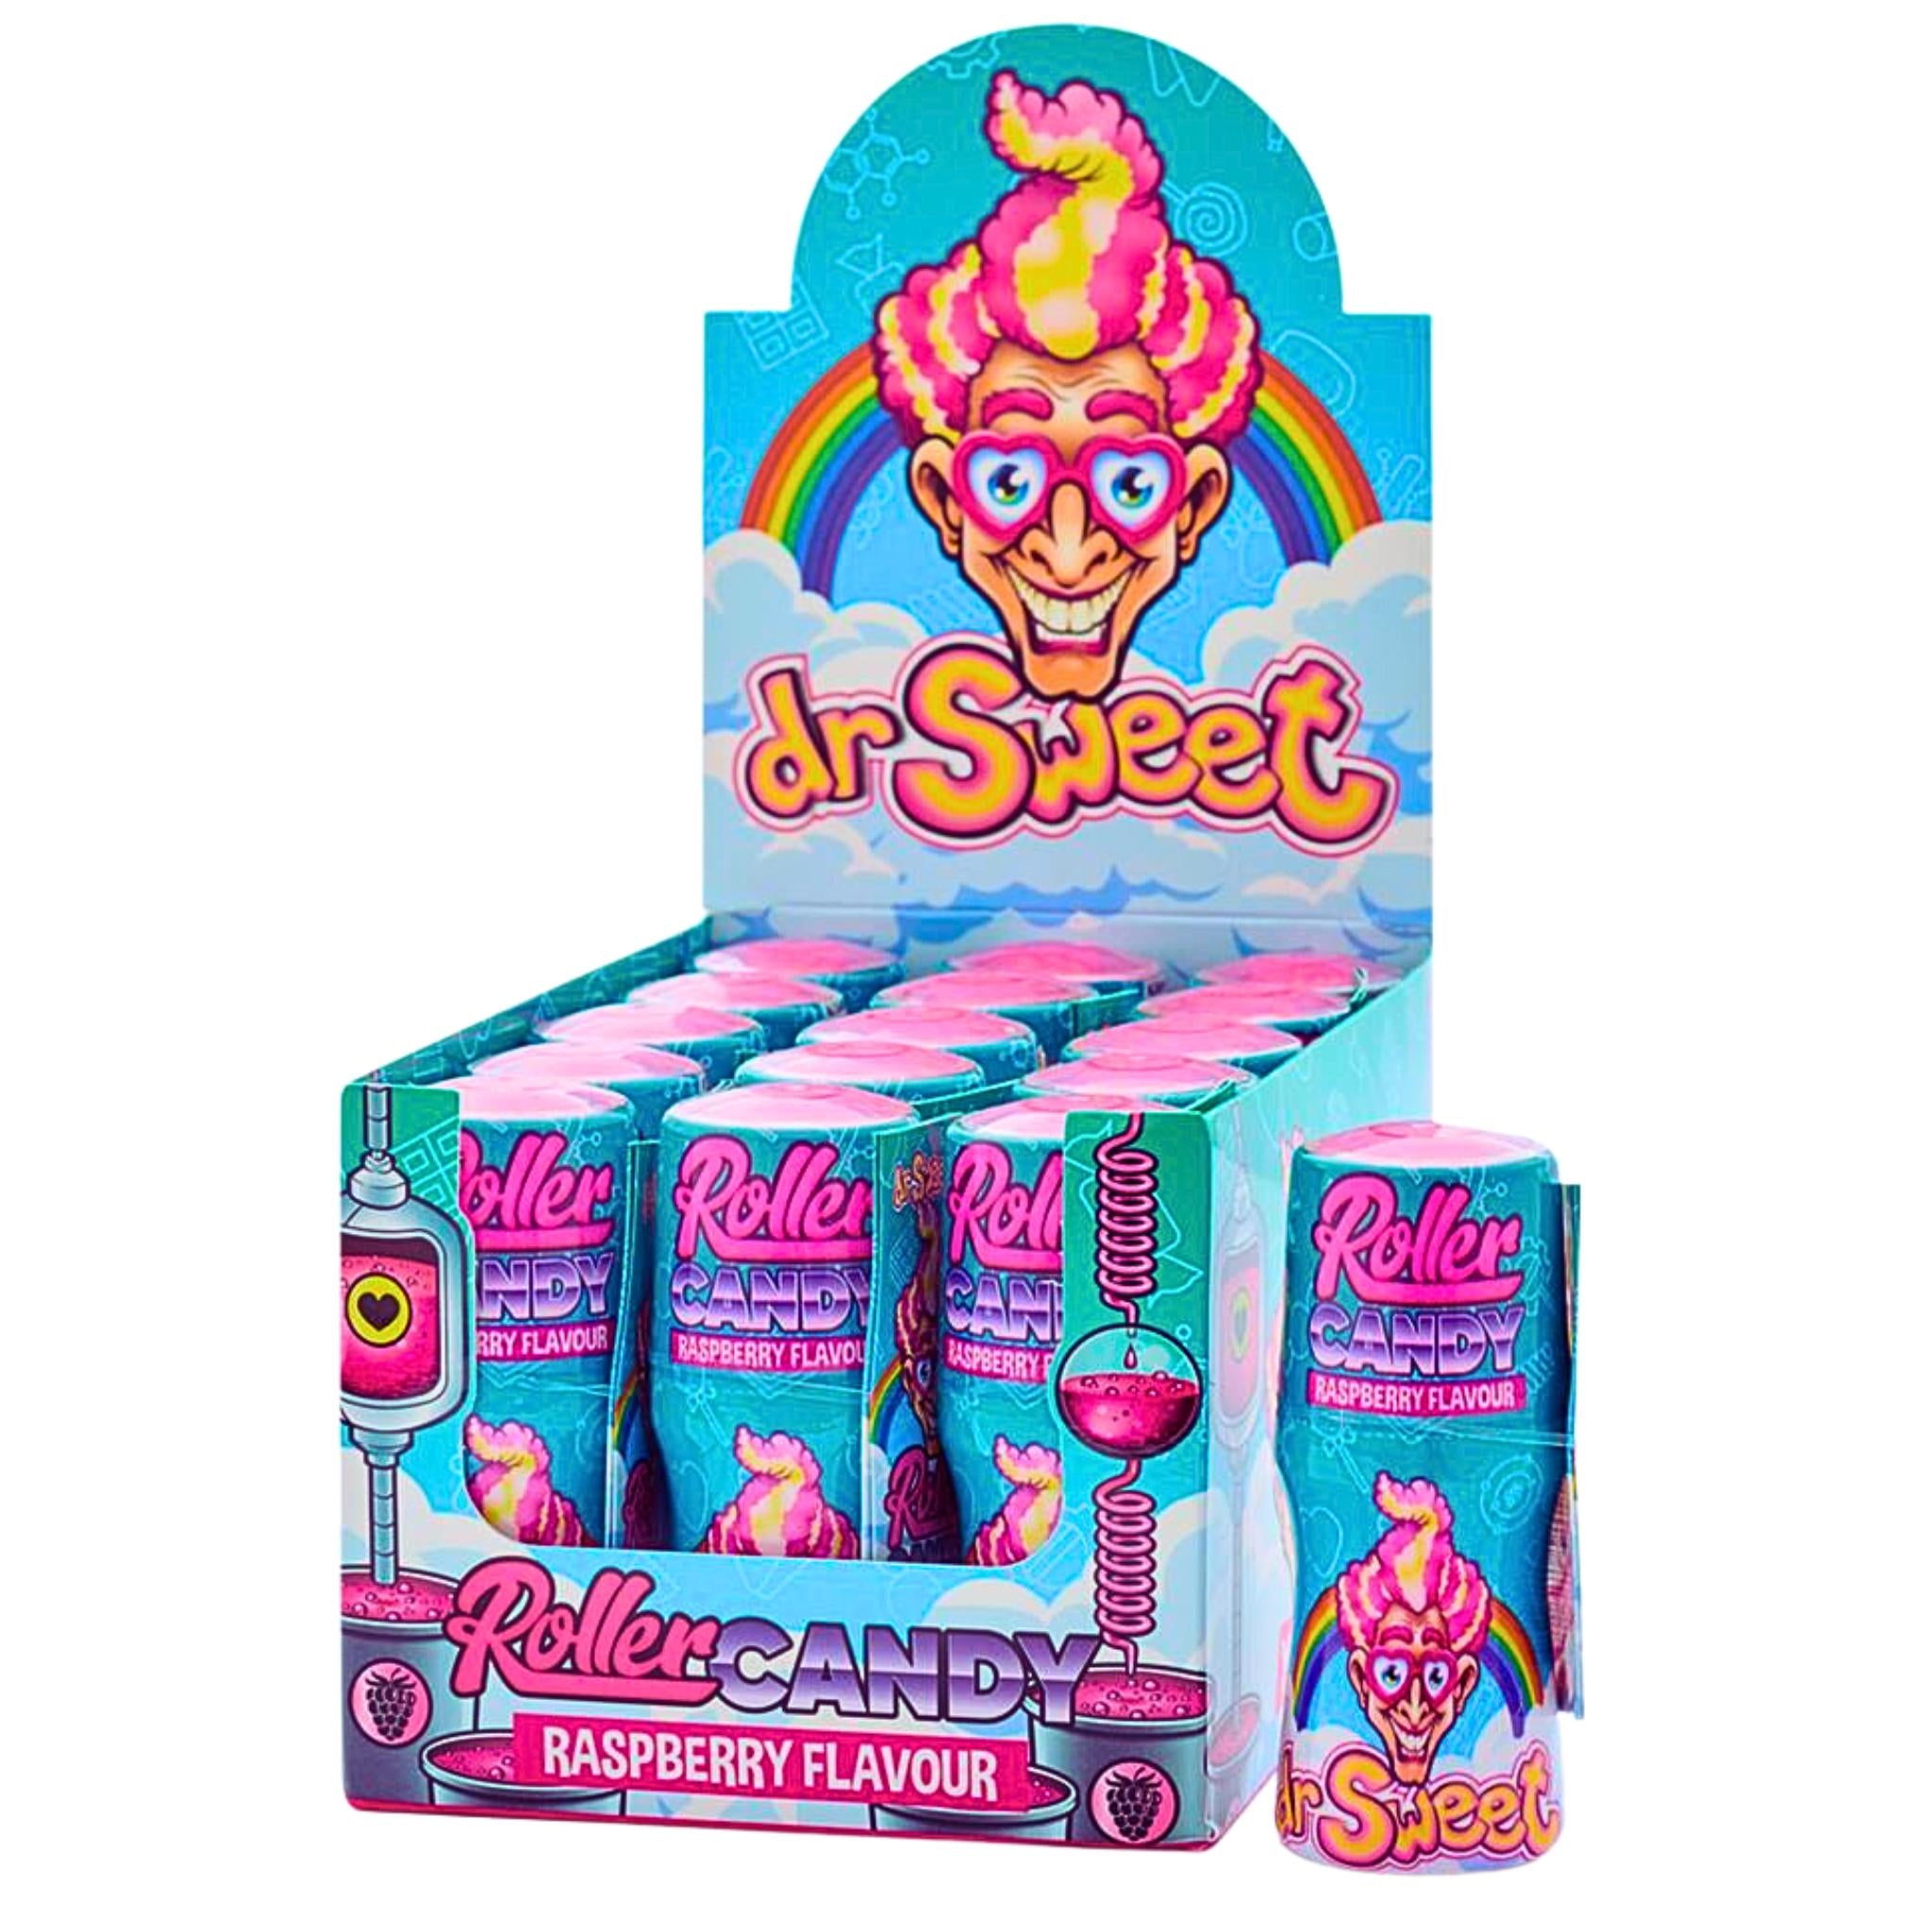 Dr Sweet Roller Candy - 40ml